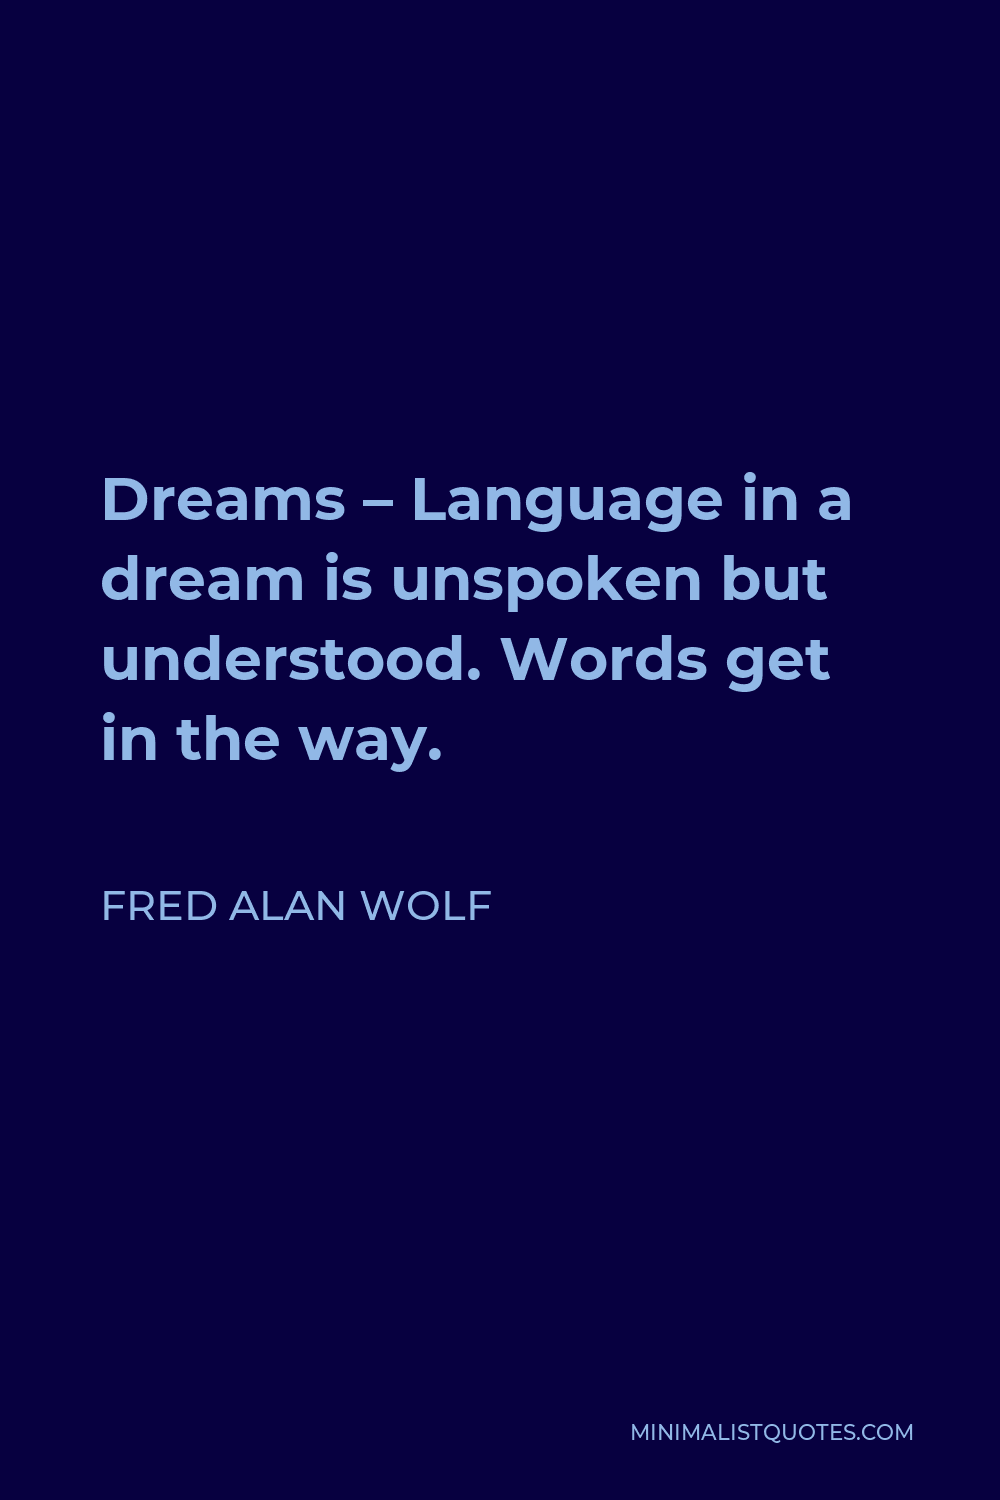 Fred Alan Wolf Quote - Dreams – Language in a dream is unspoken but understood. Words get in the way.